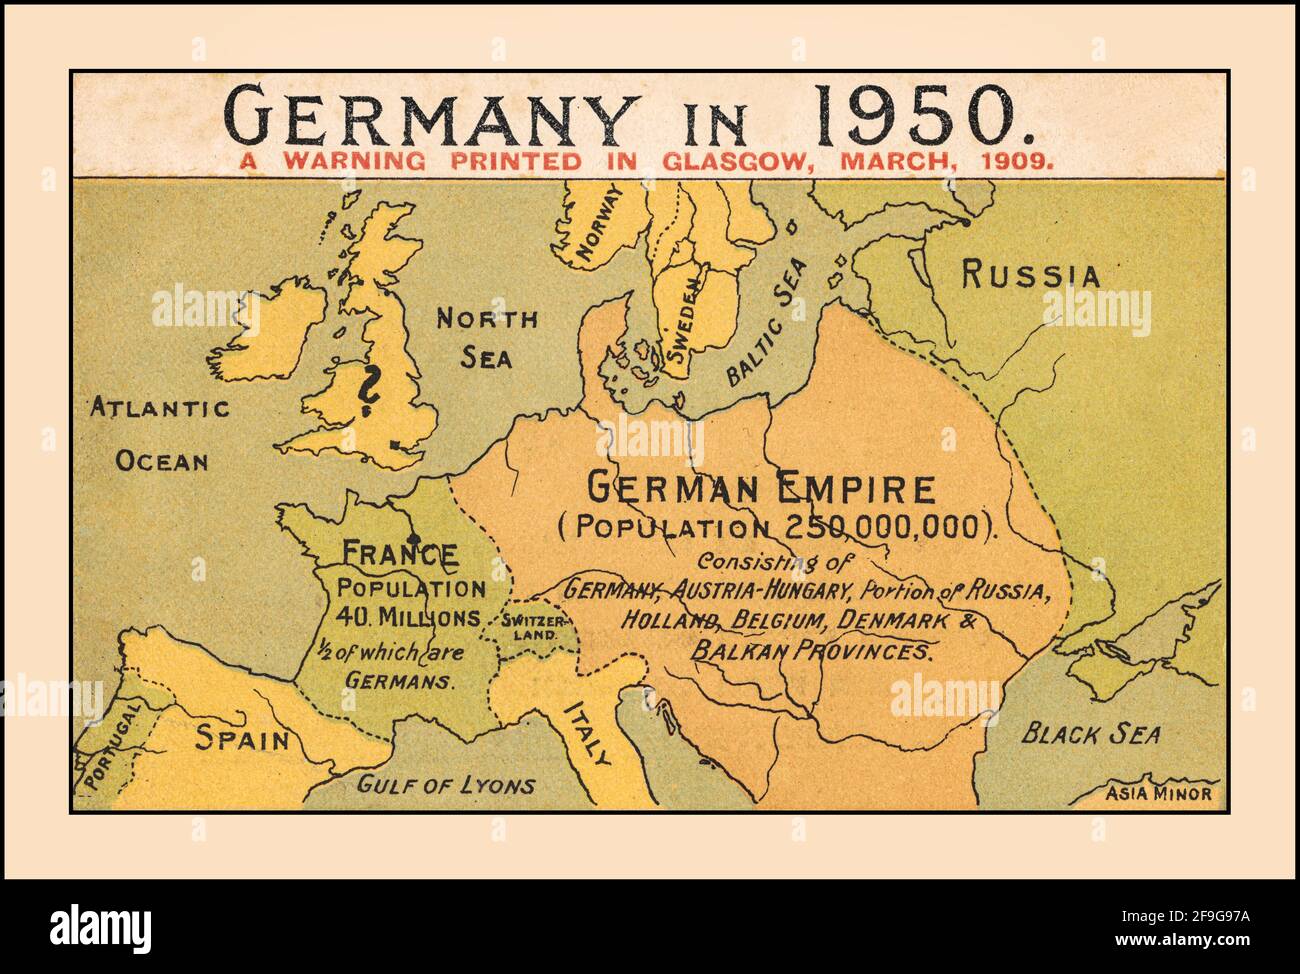 Vintage 1900’s map illustration ' Germany in 1950'' warning of the future threat of Germany's expansionist goals. It shows a Germany looking forward in 1950 occupying Austria-Hungary, parts of Russia, Holland, Belgium, Denmark and the Balkans - a total population of 250 million people. Printed in Glasgow and distributed to members of Parliament in 1909 at the time of fierce debate in Britain over how many dreadnoughts (battleships) to build to counter the growing threat of German naval rearmament. Stock Photo